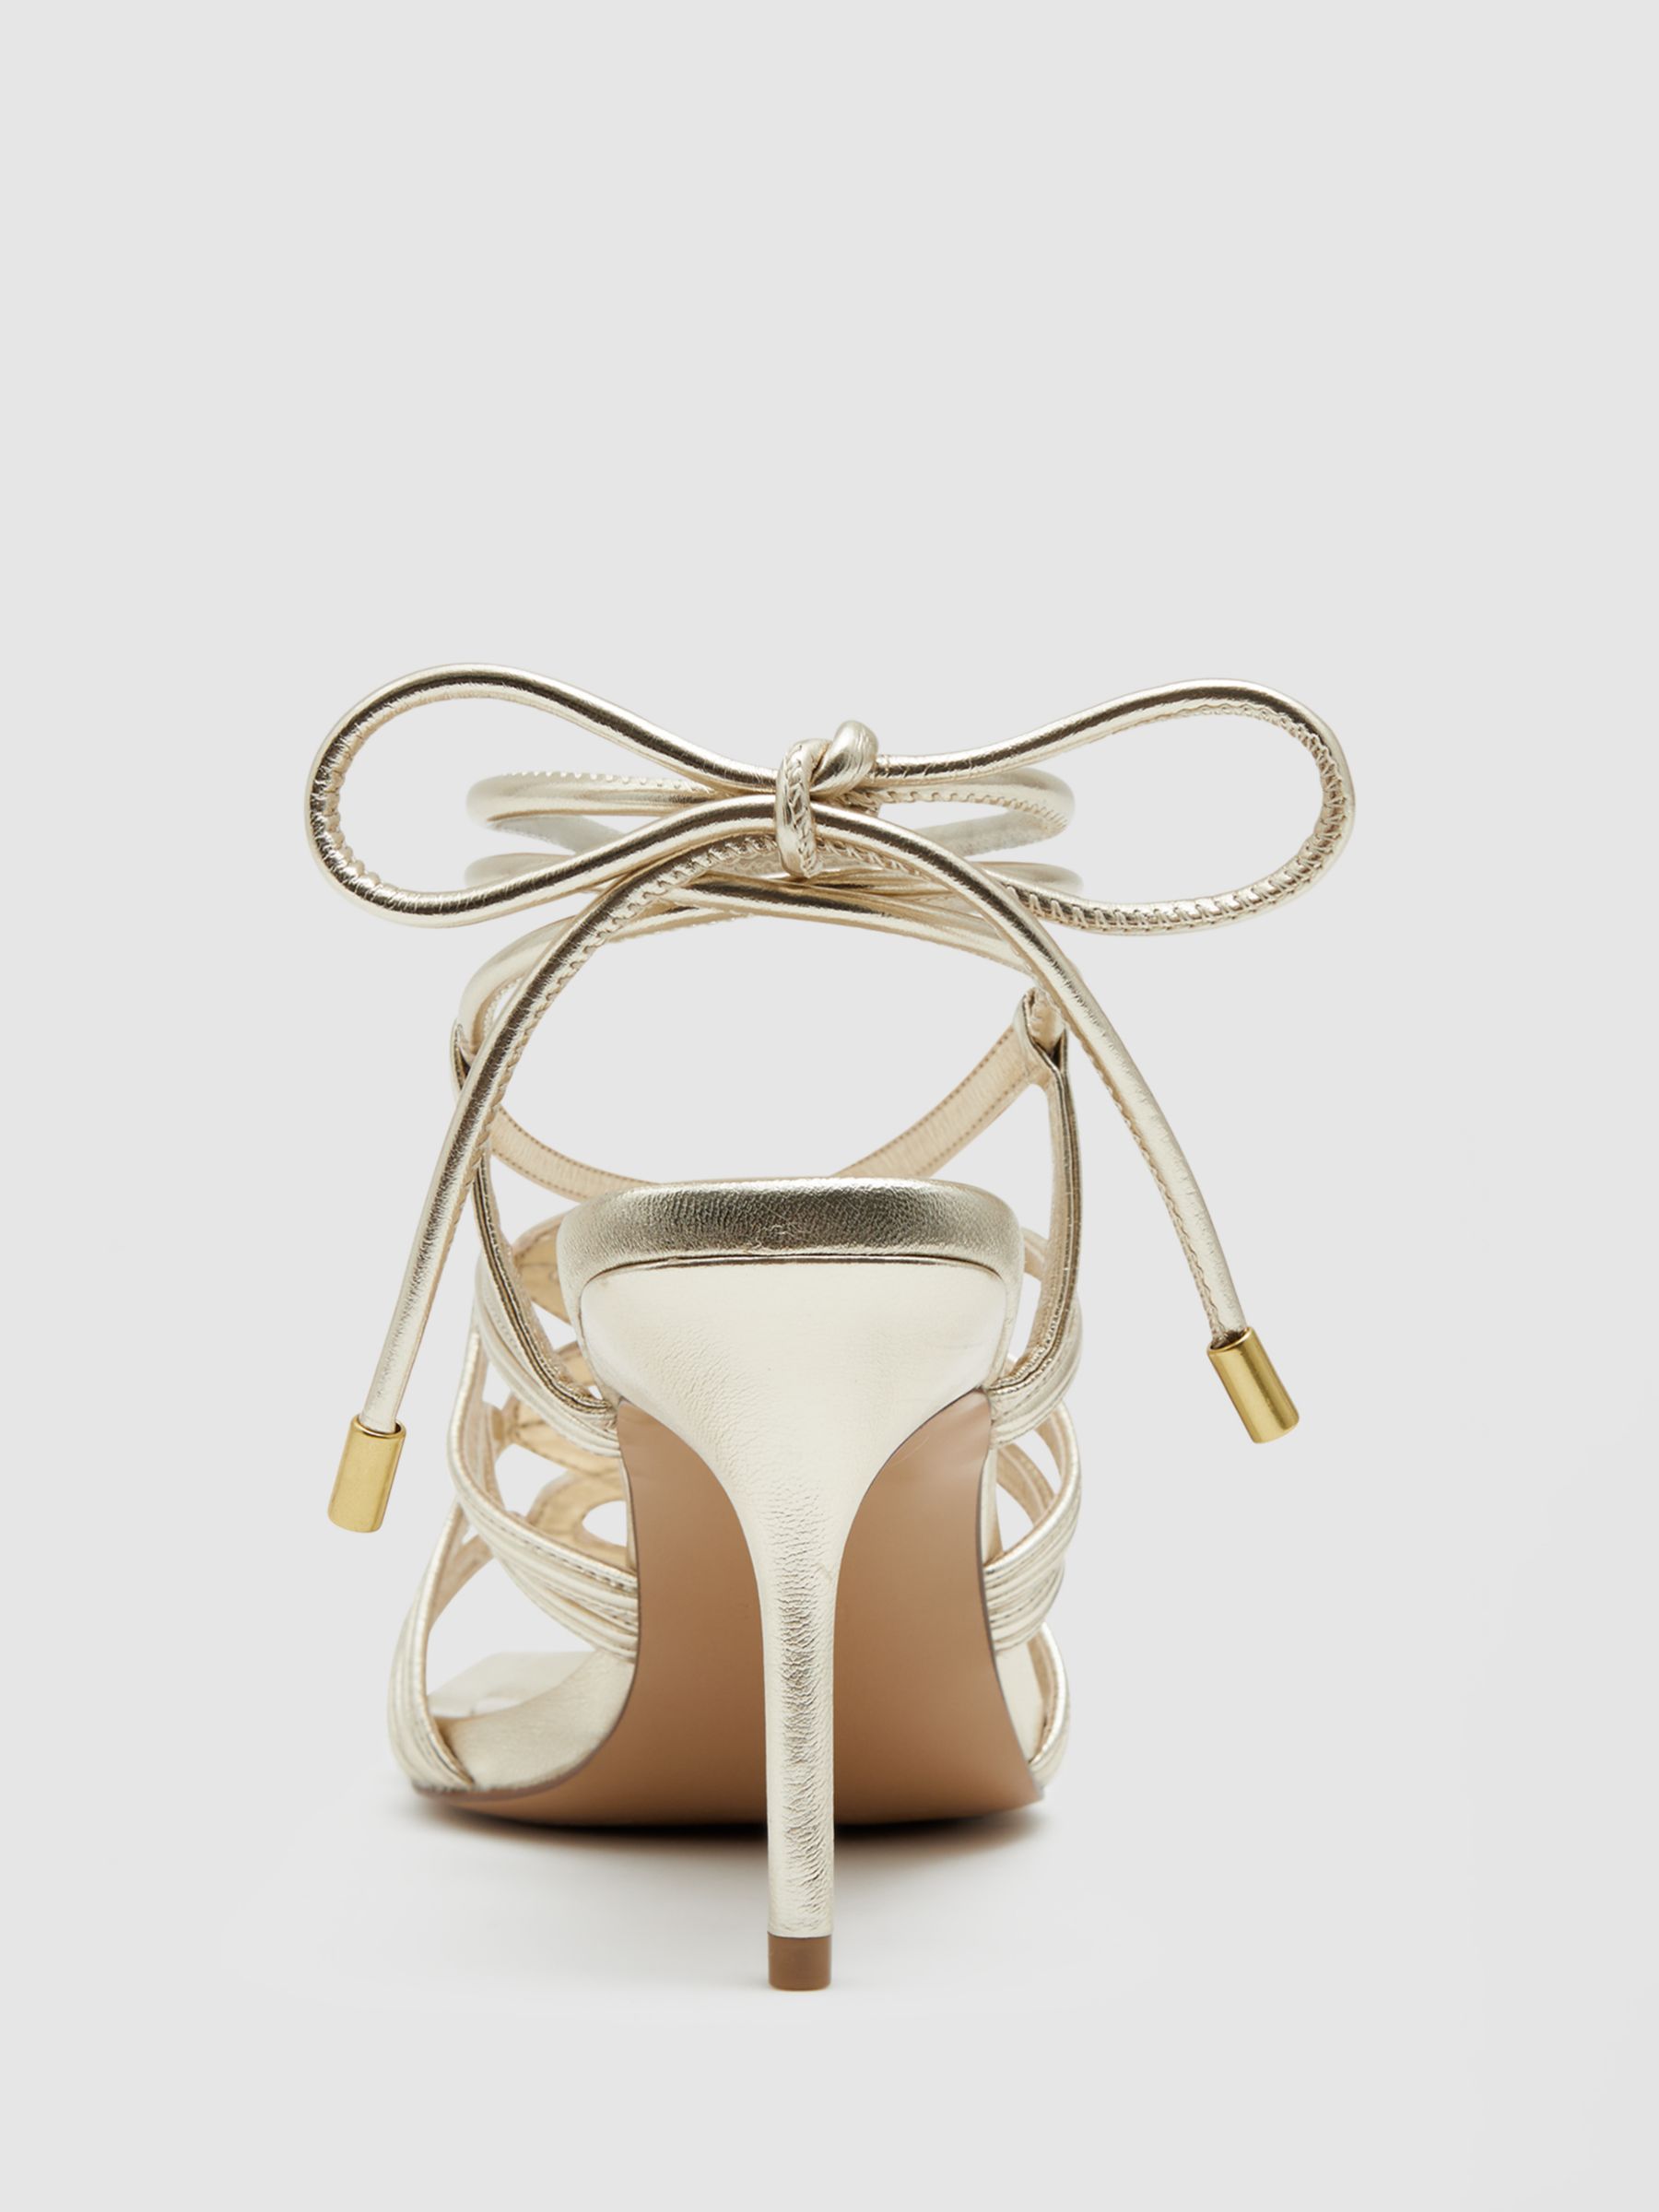 Reiss Keira Rope Strap High Heel Sandals, Gold, 3